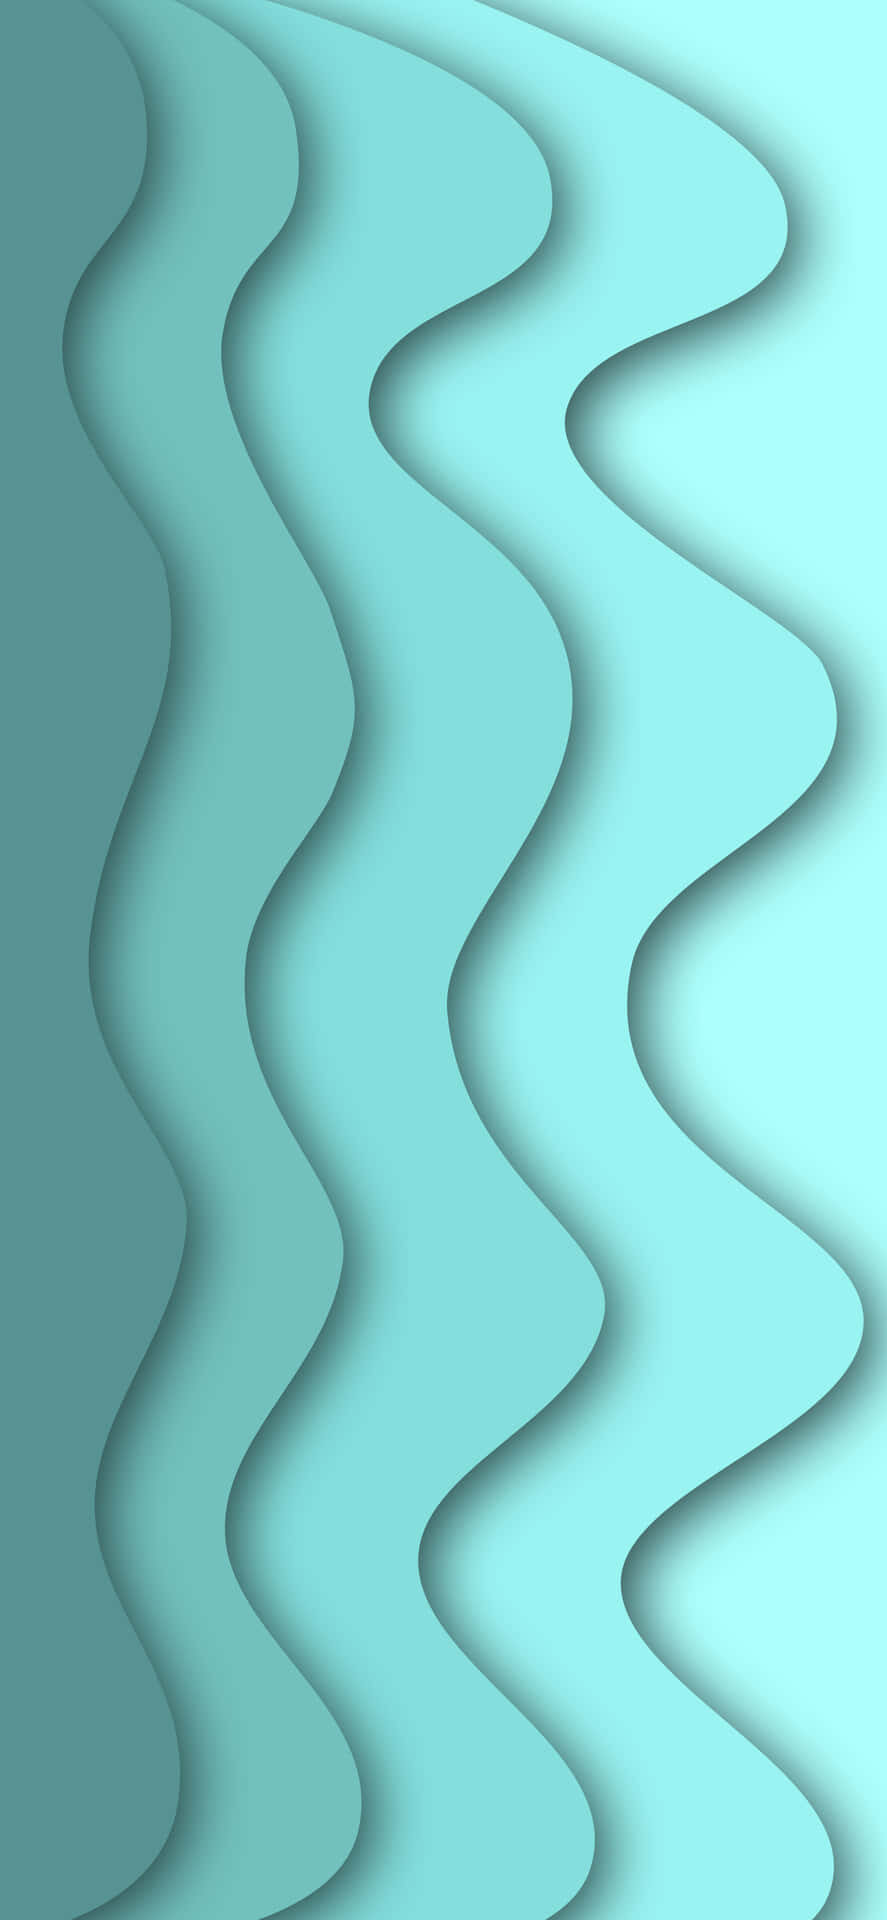 Turquoise Iphone Background Wallpaper